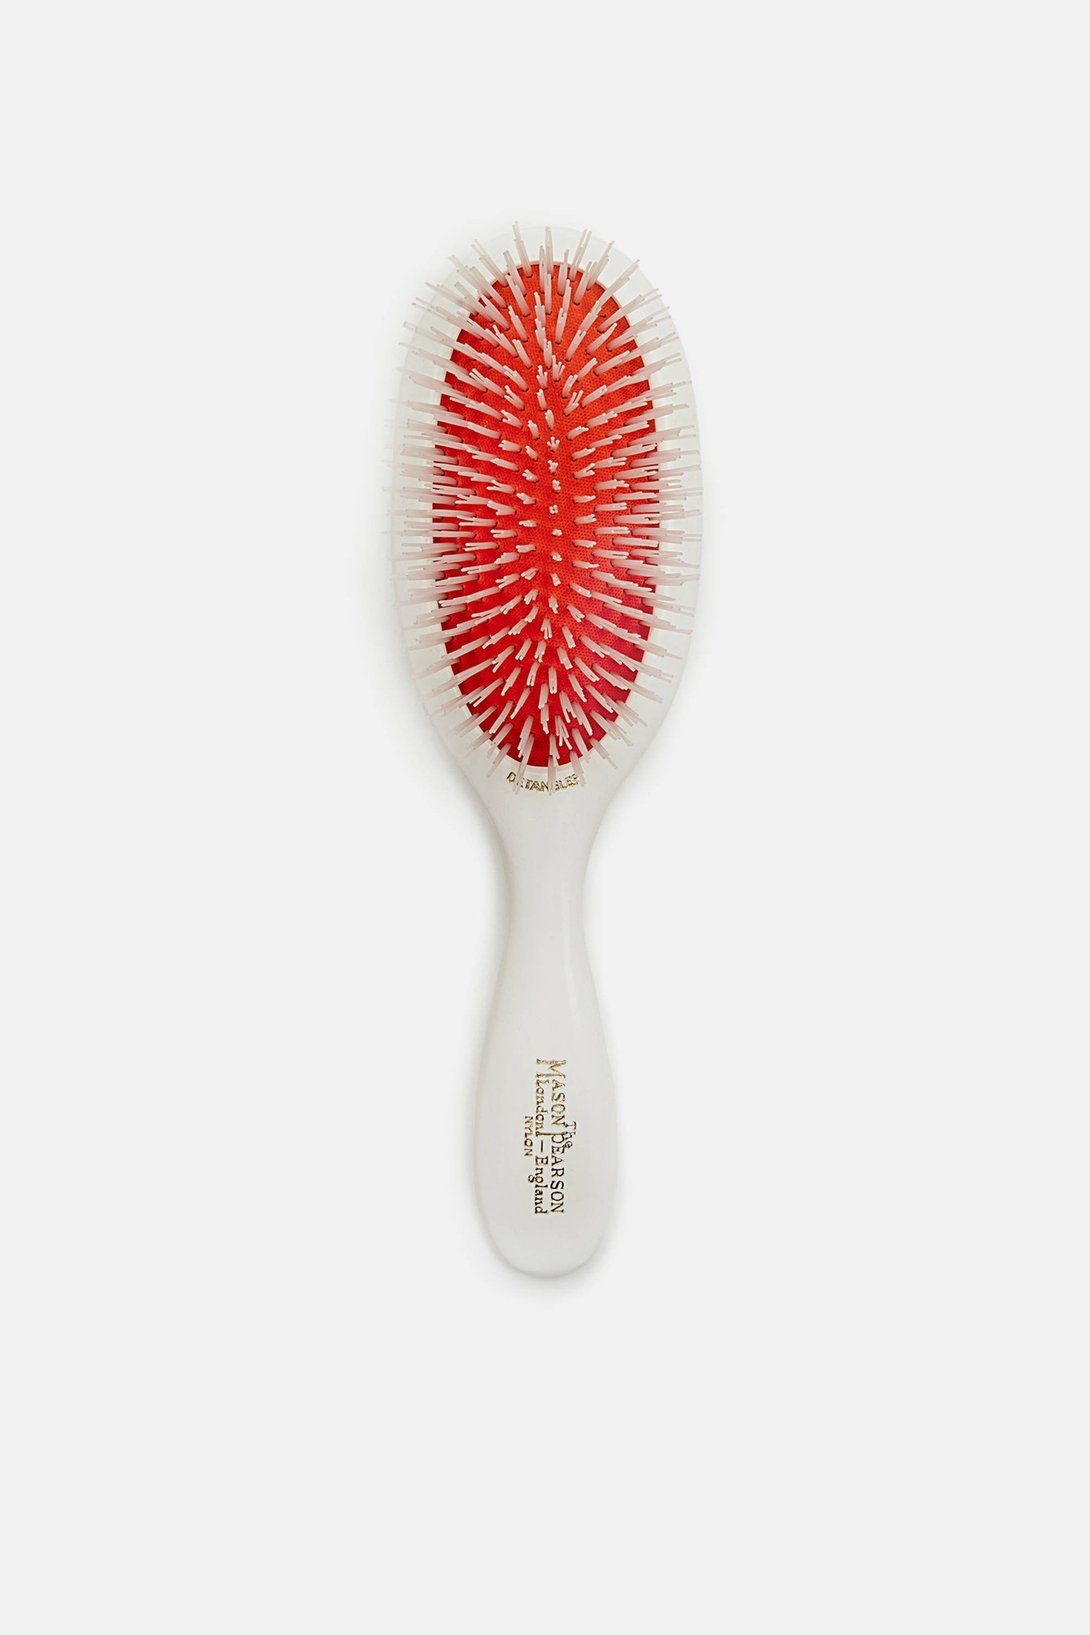 The Best Brush for Thick Hair | Mane Addicts – Mane by Mane Addicts